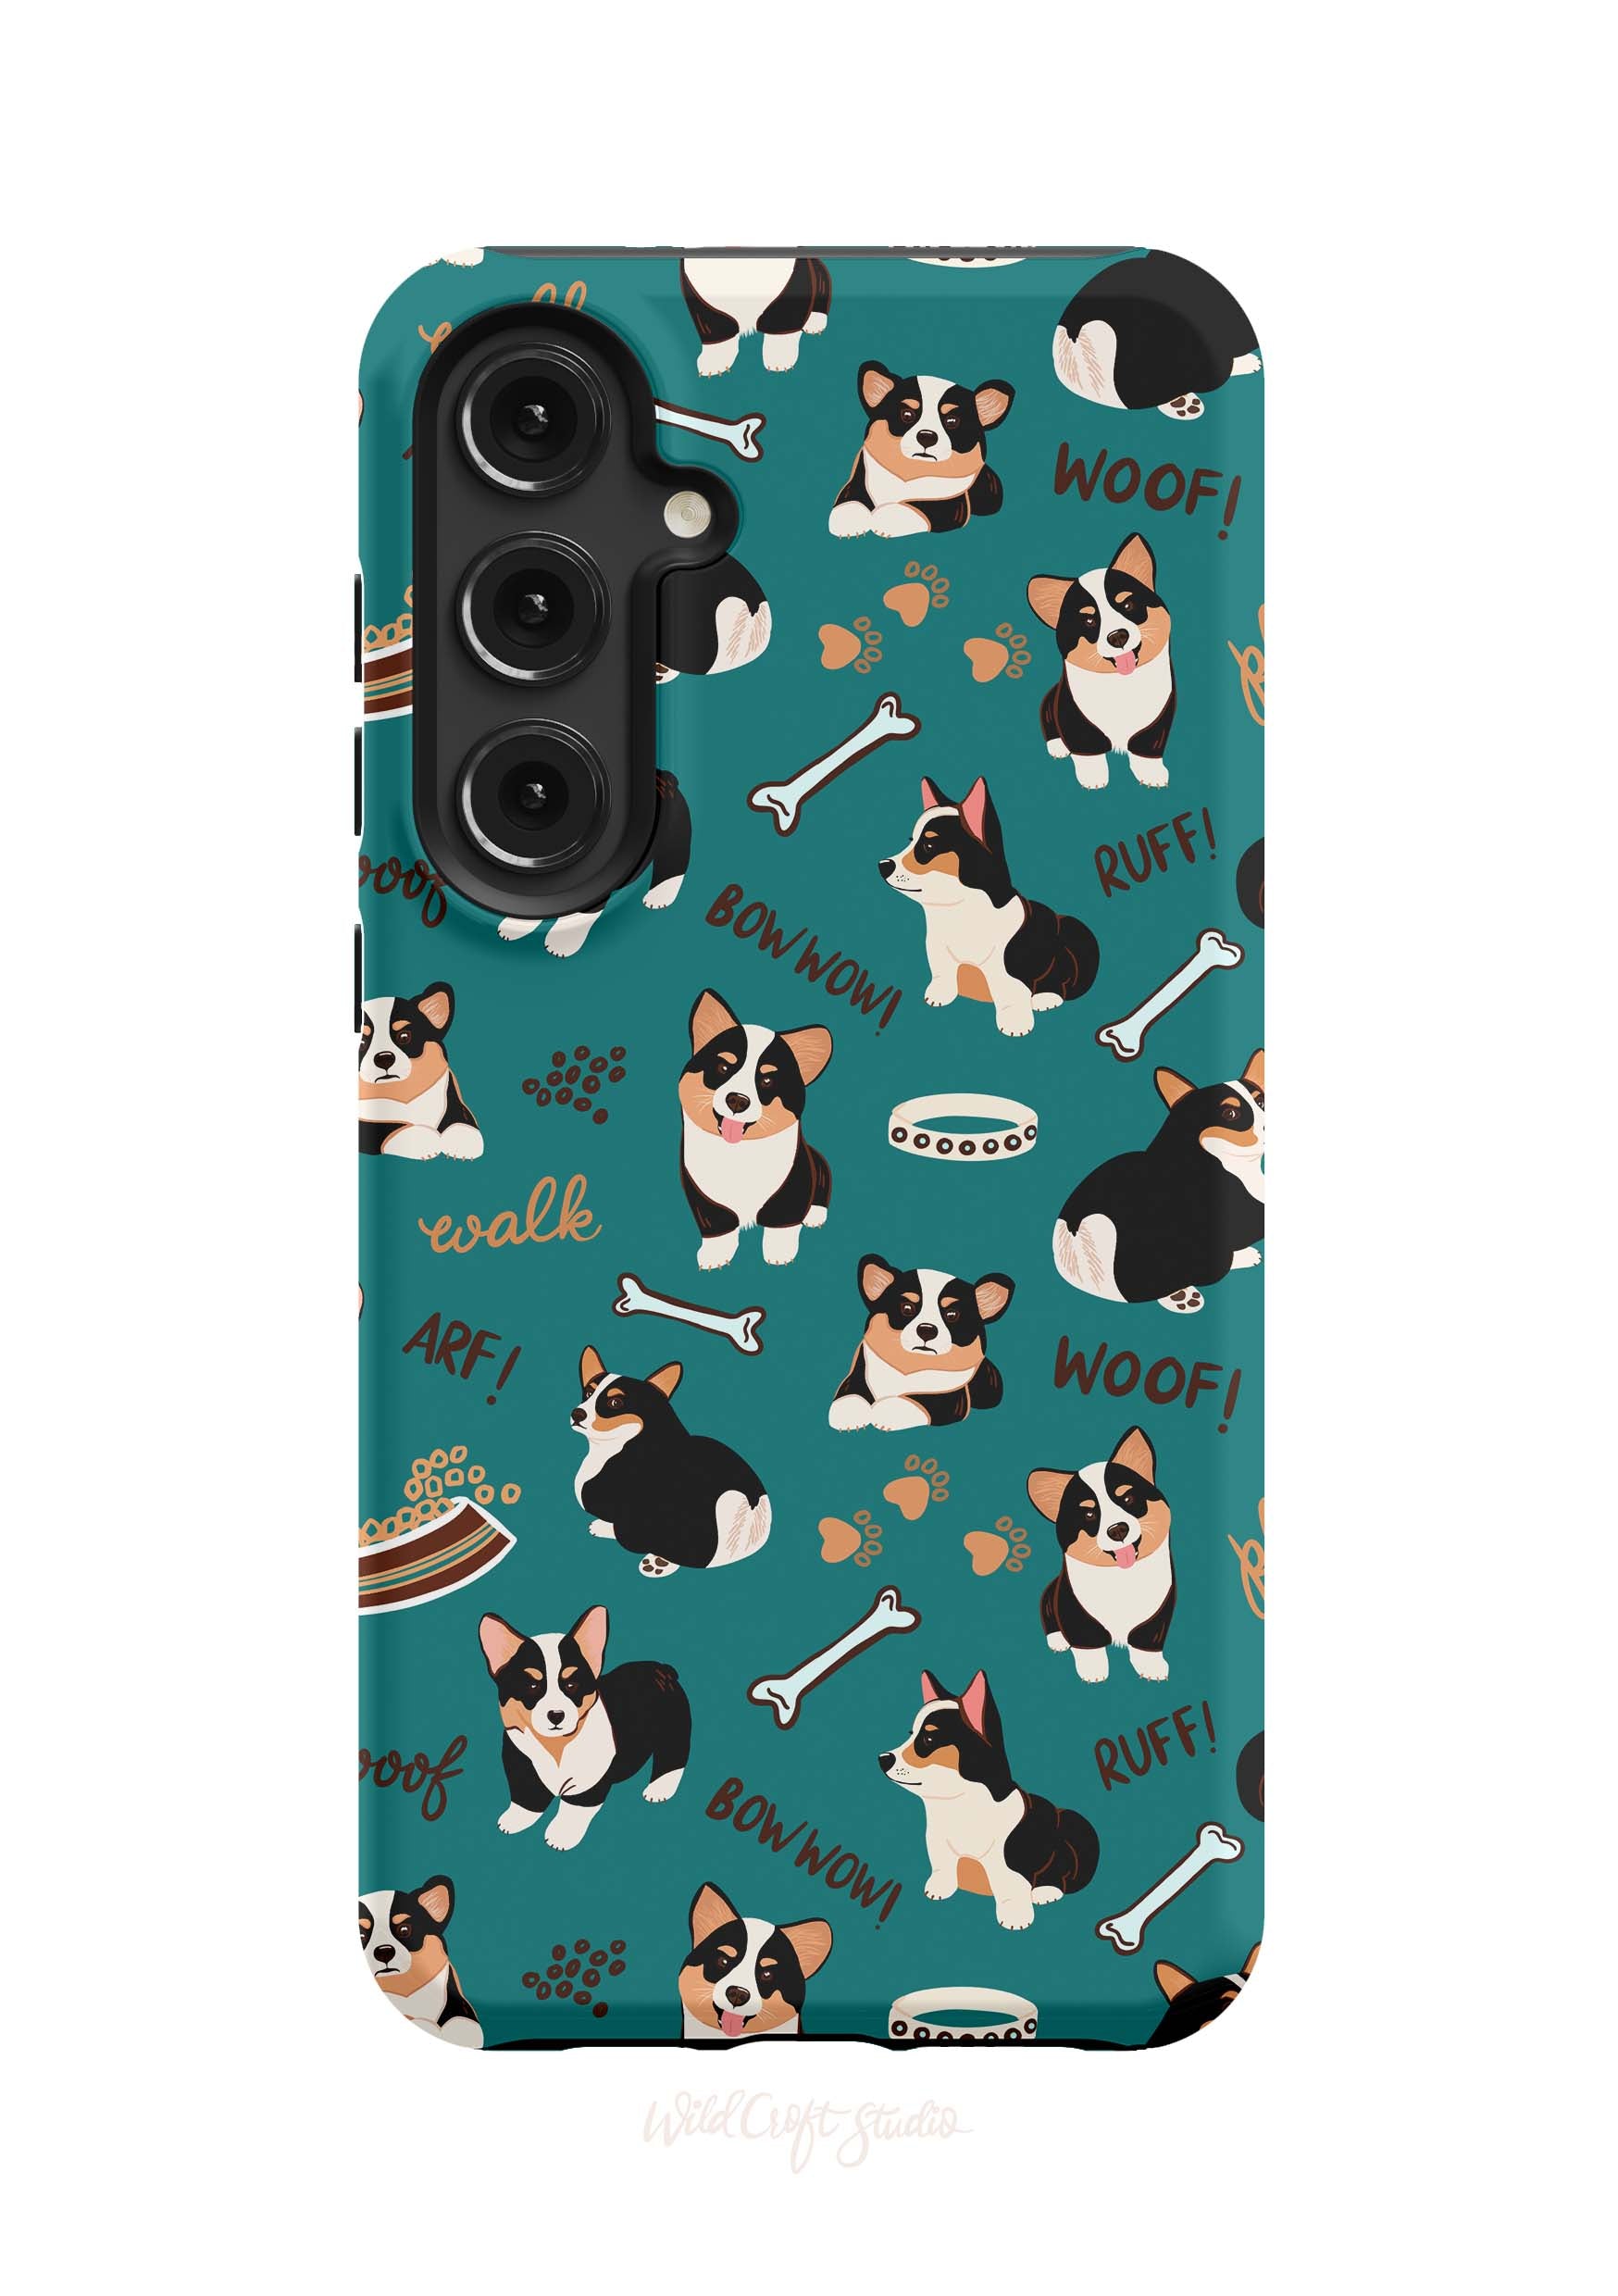 a phone case with a dog on it